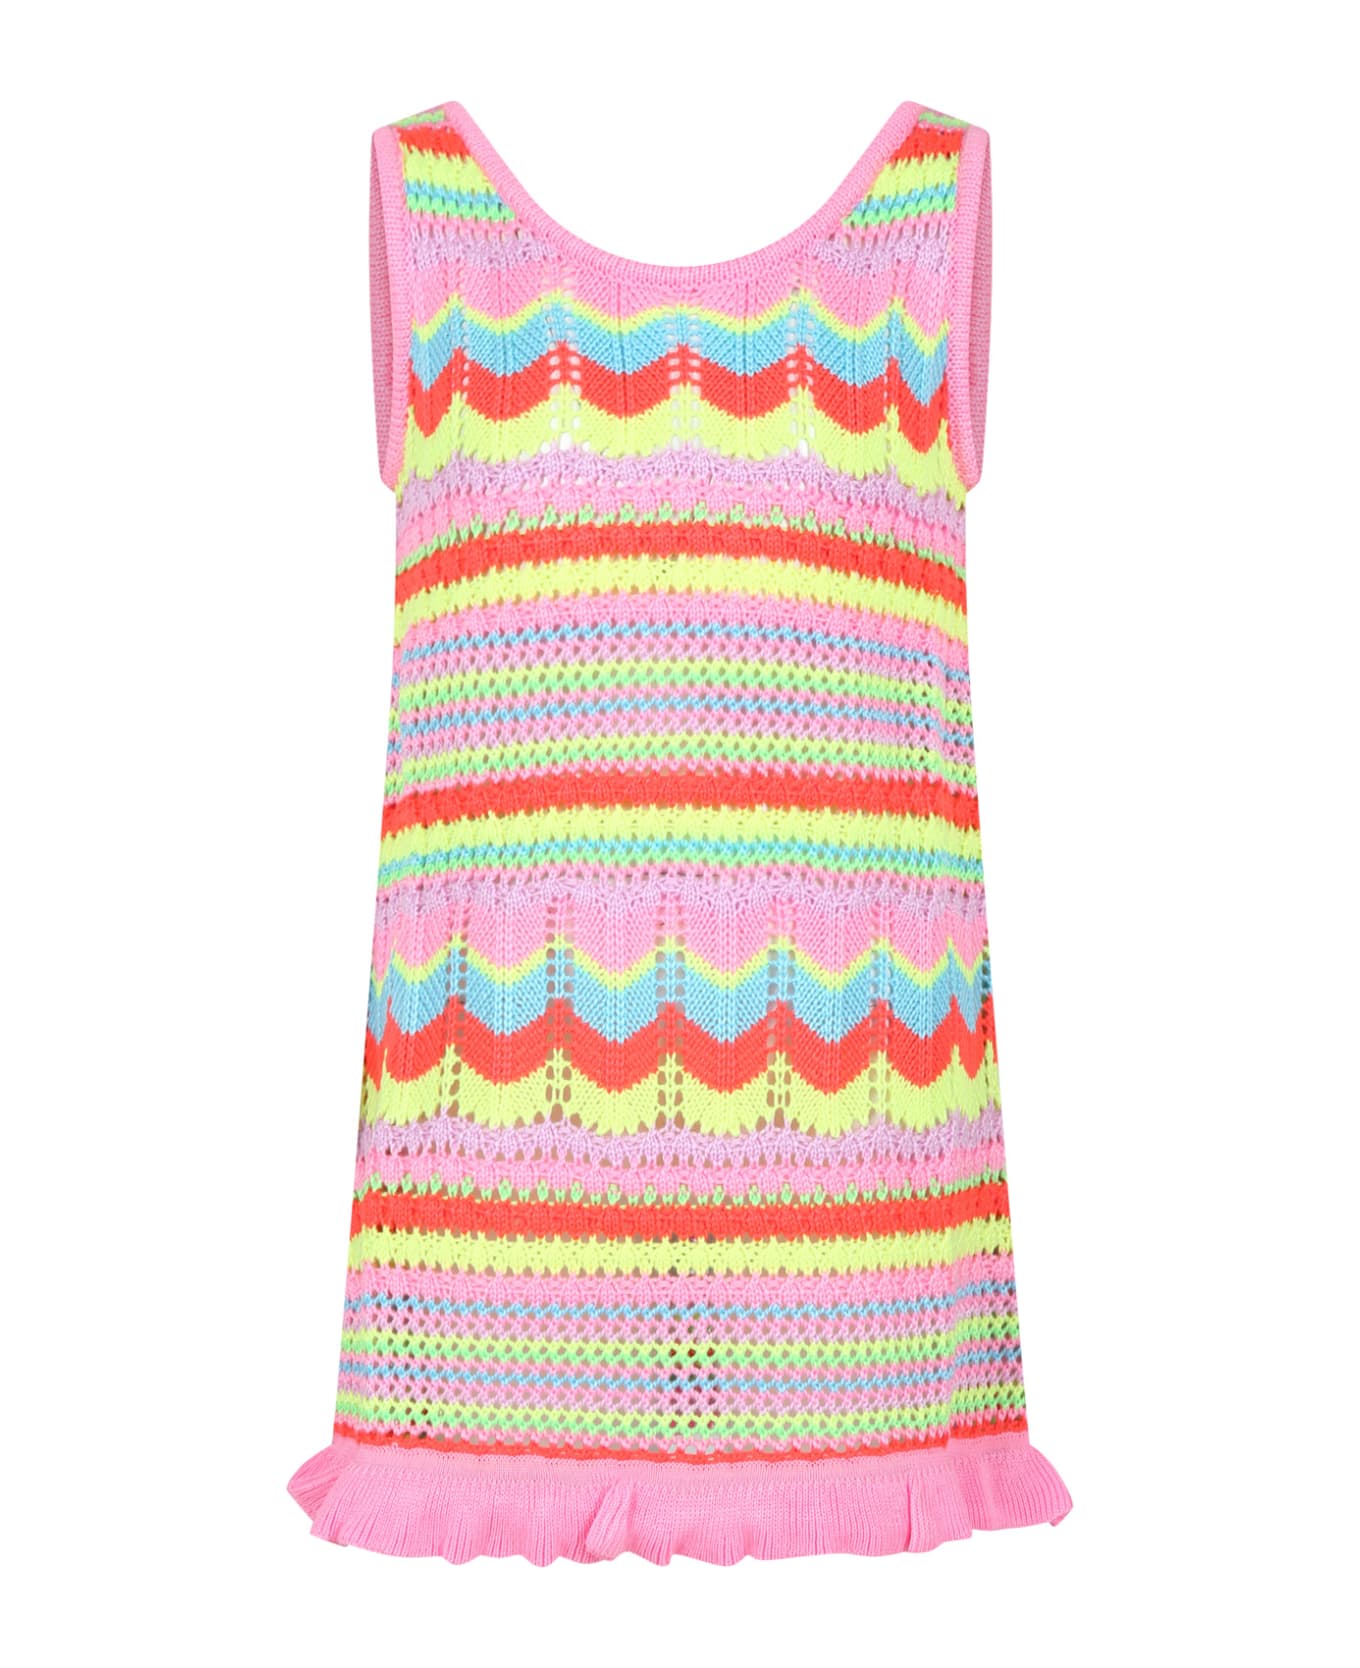 Billieblush Pink Swimsuit Cover-up For Girl - Multicolor